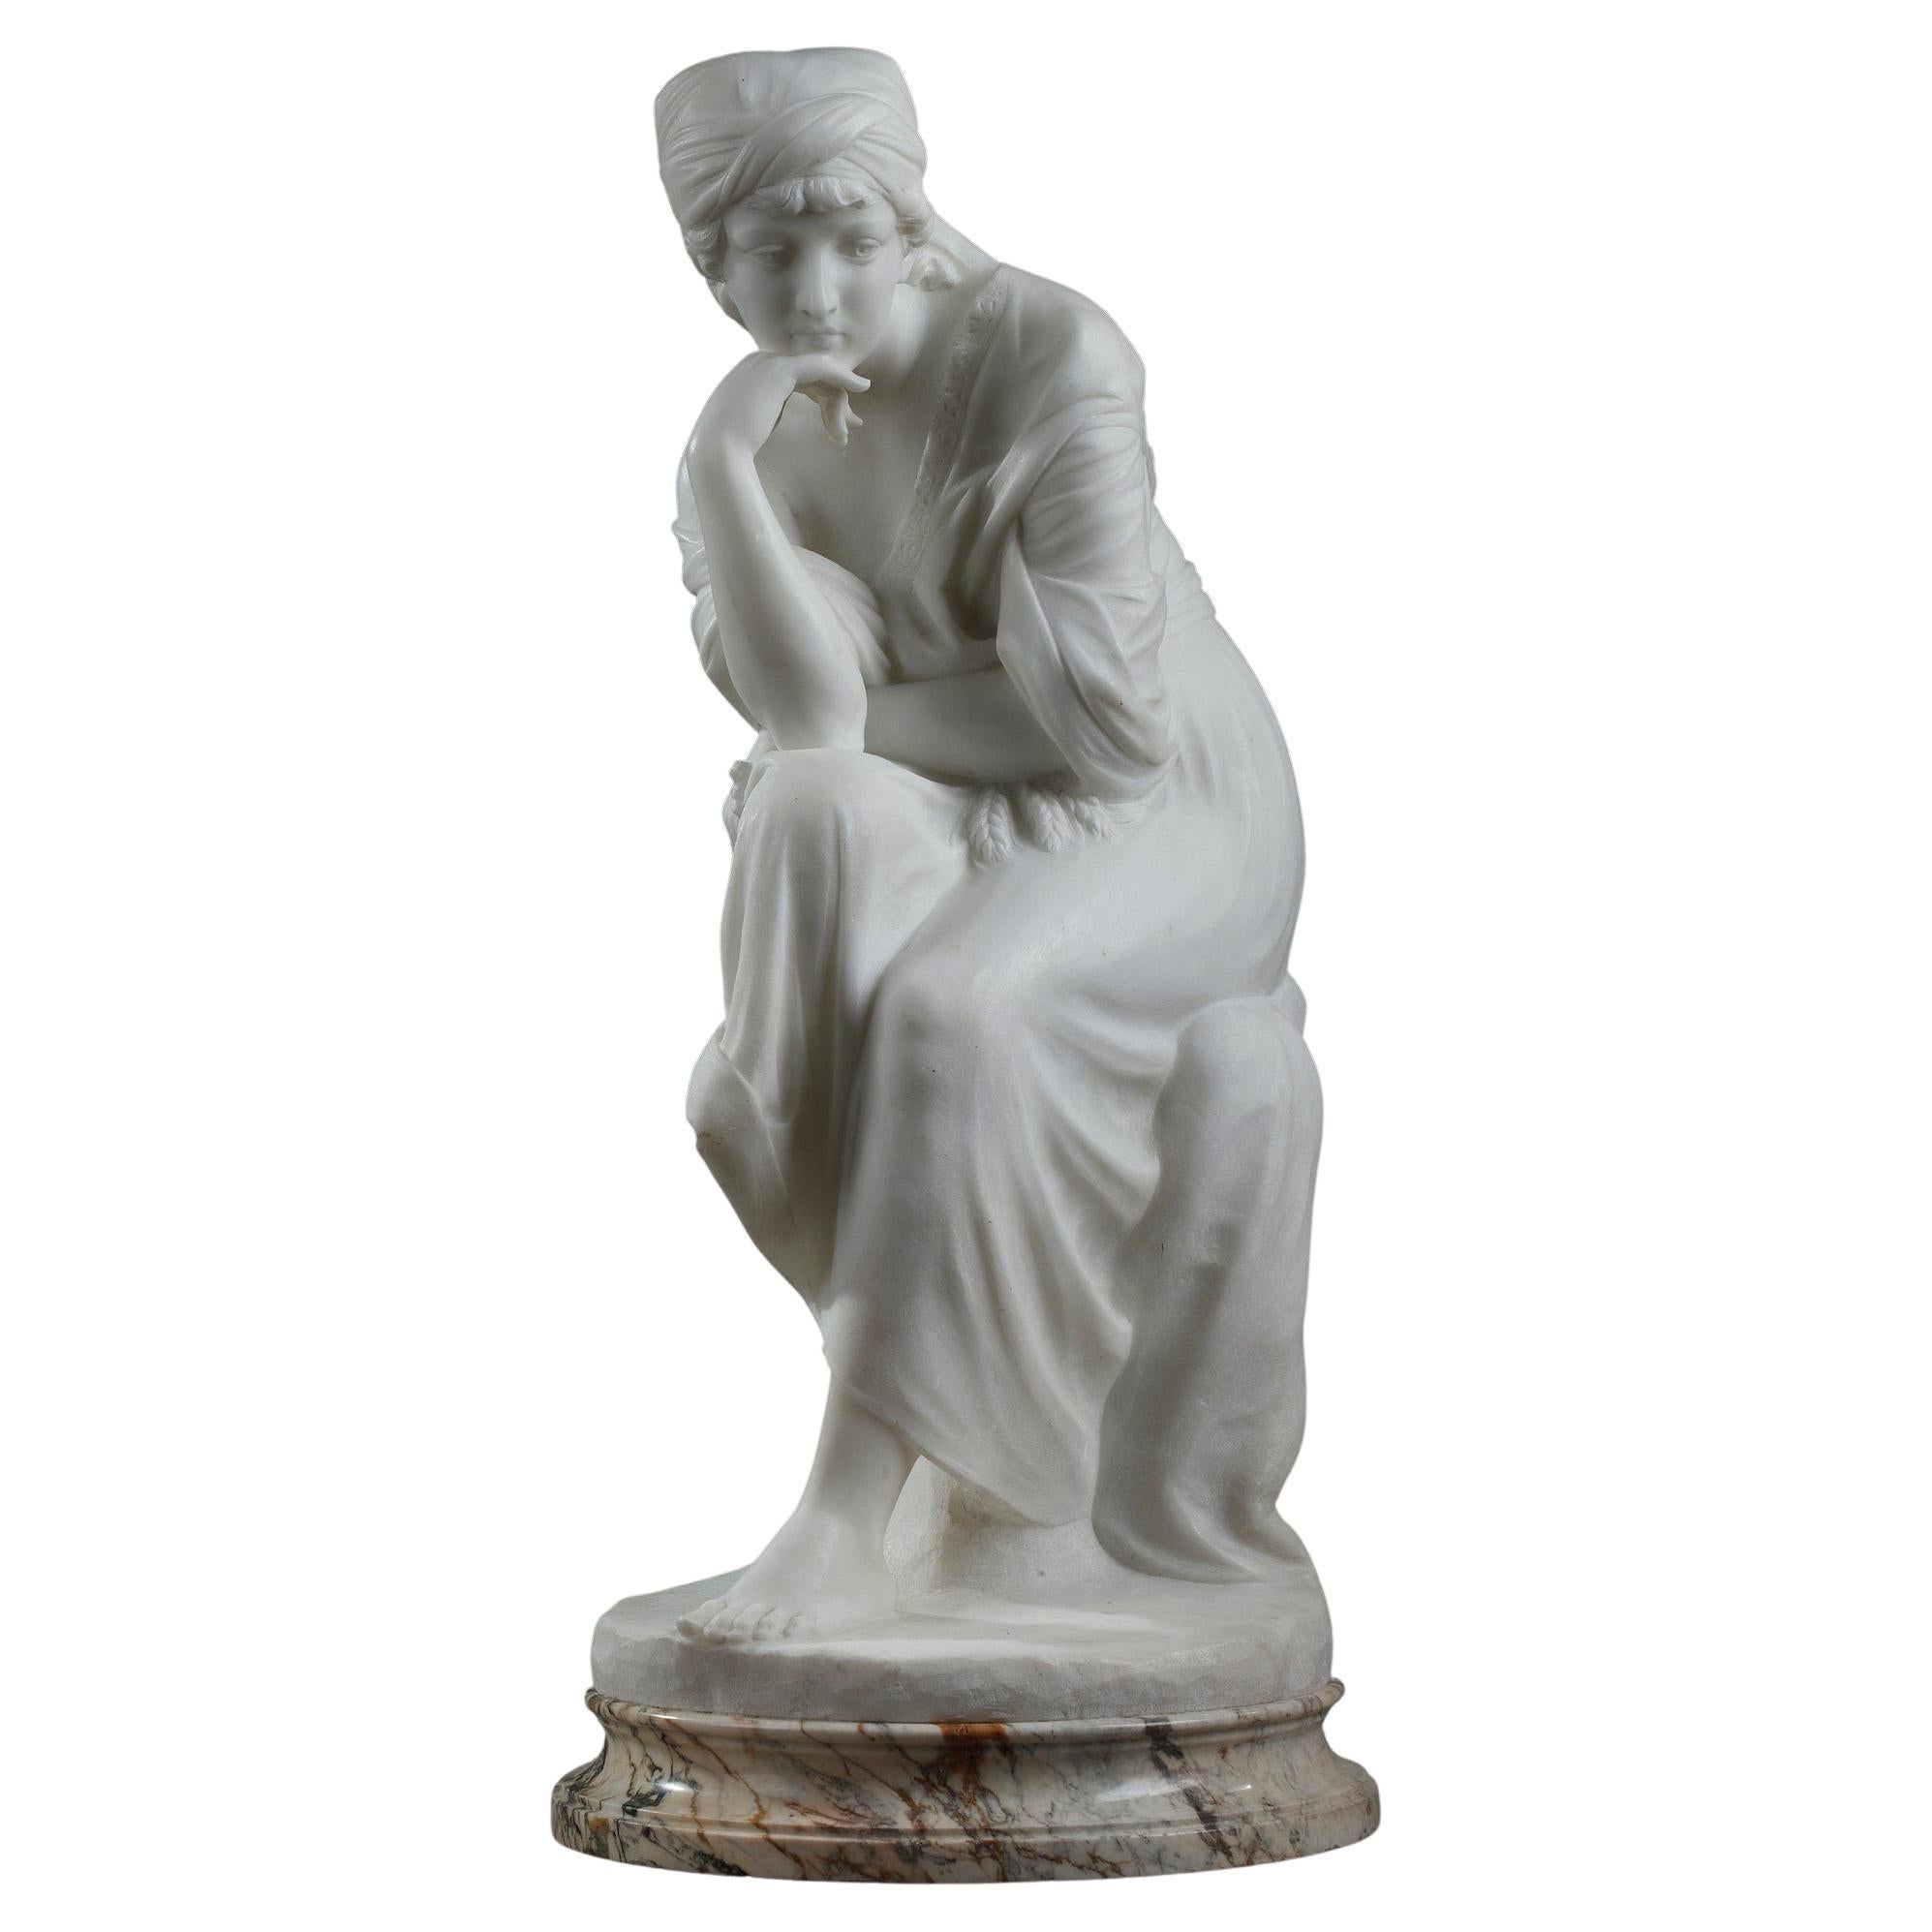 Statue in White Marble "Meditative Young Woman", Signed Pugi